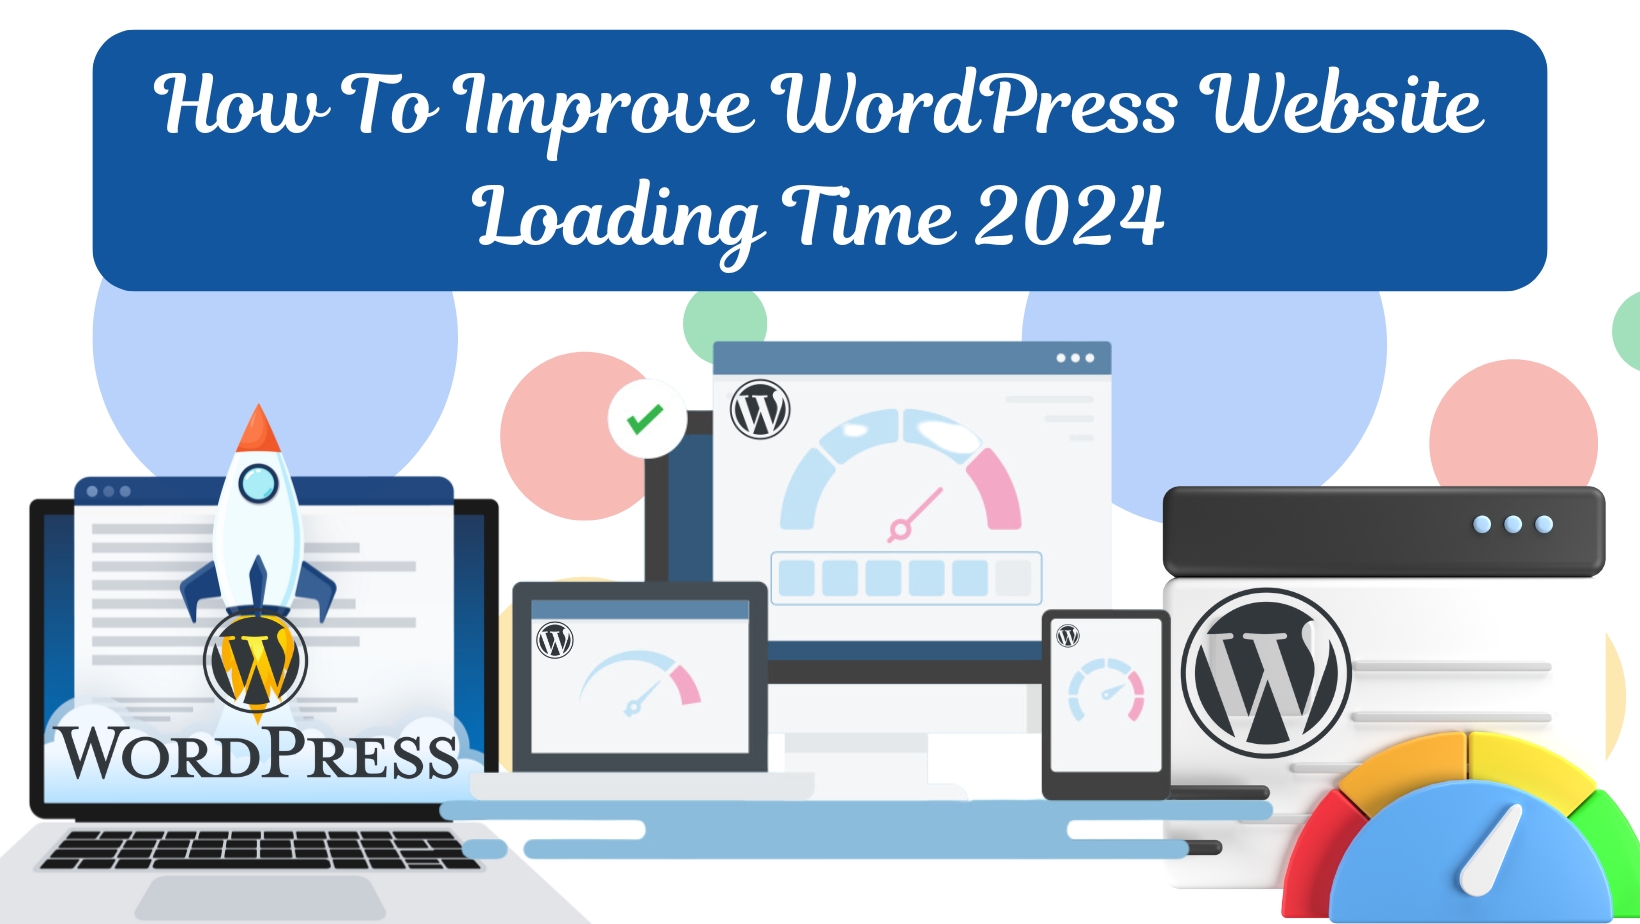 How To Improve WordPress Website Loading Time 2024